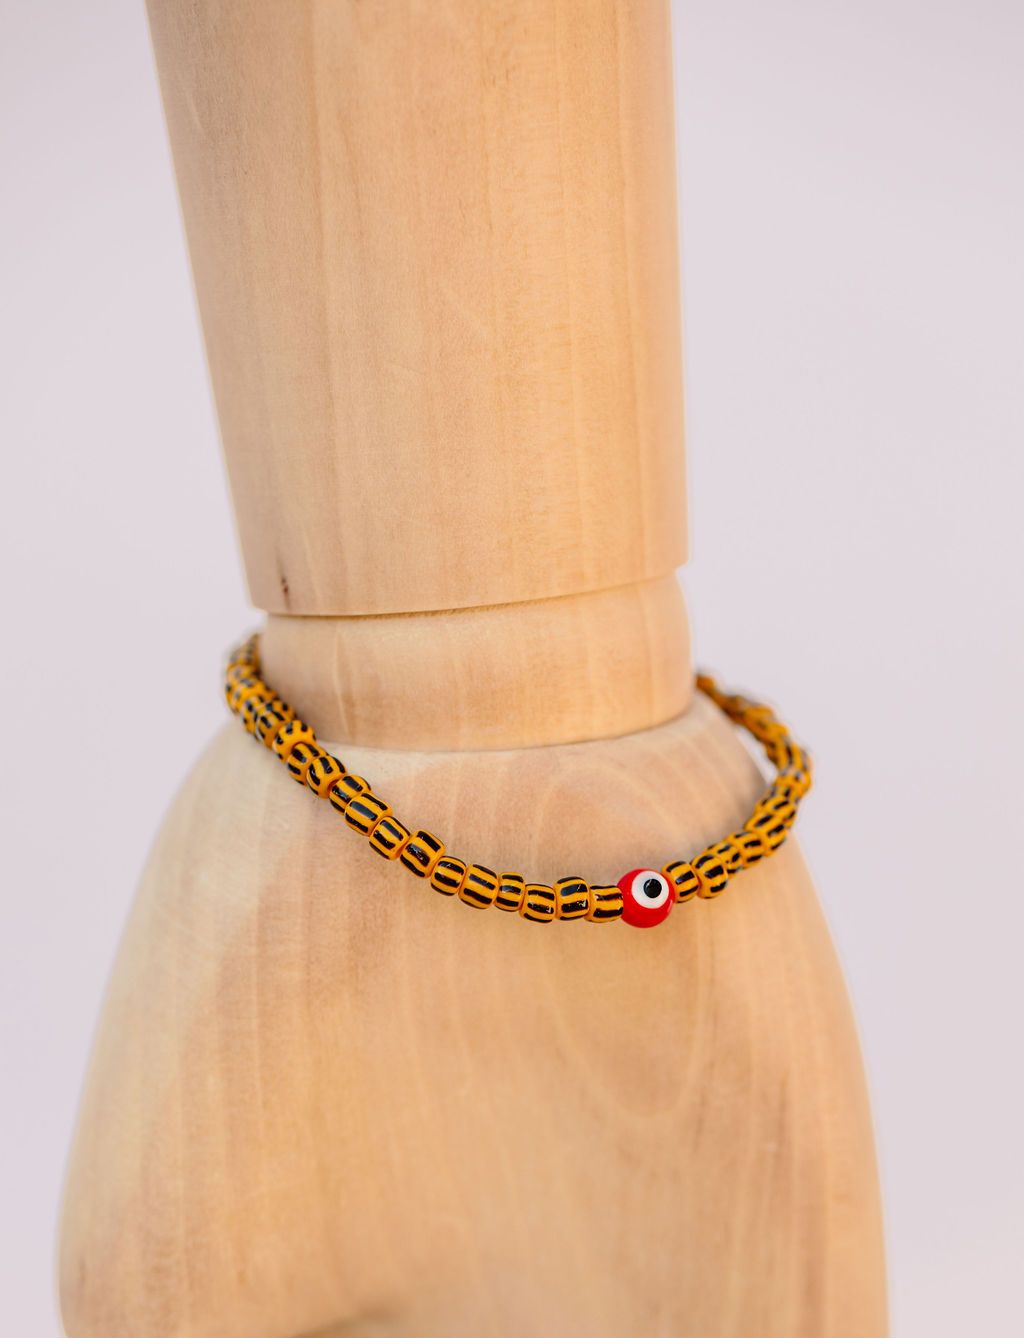 Black & yellow striped Japanese glass beads on sturdy elastic. For that little pop of color and protection for your personal space bubble. Wear just one or stack 'em.